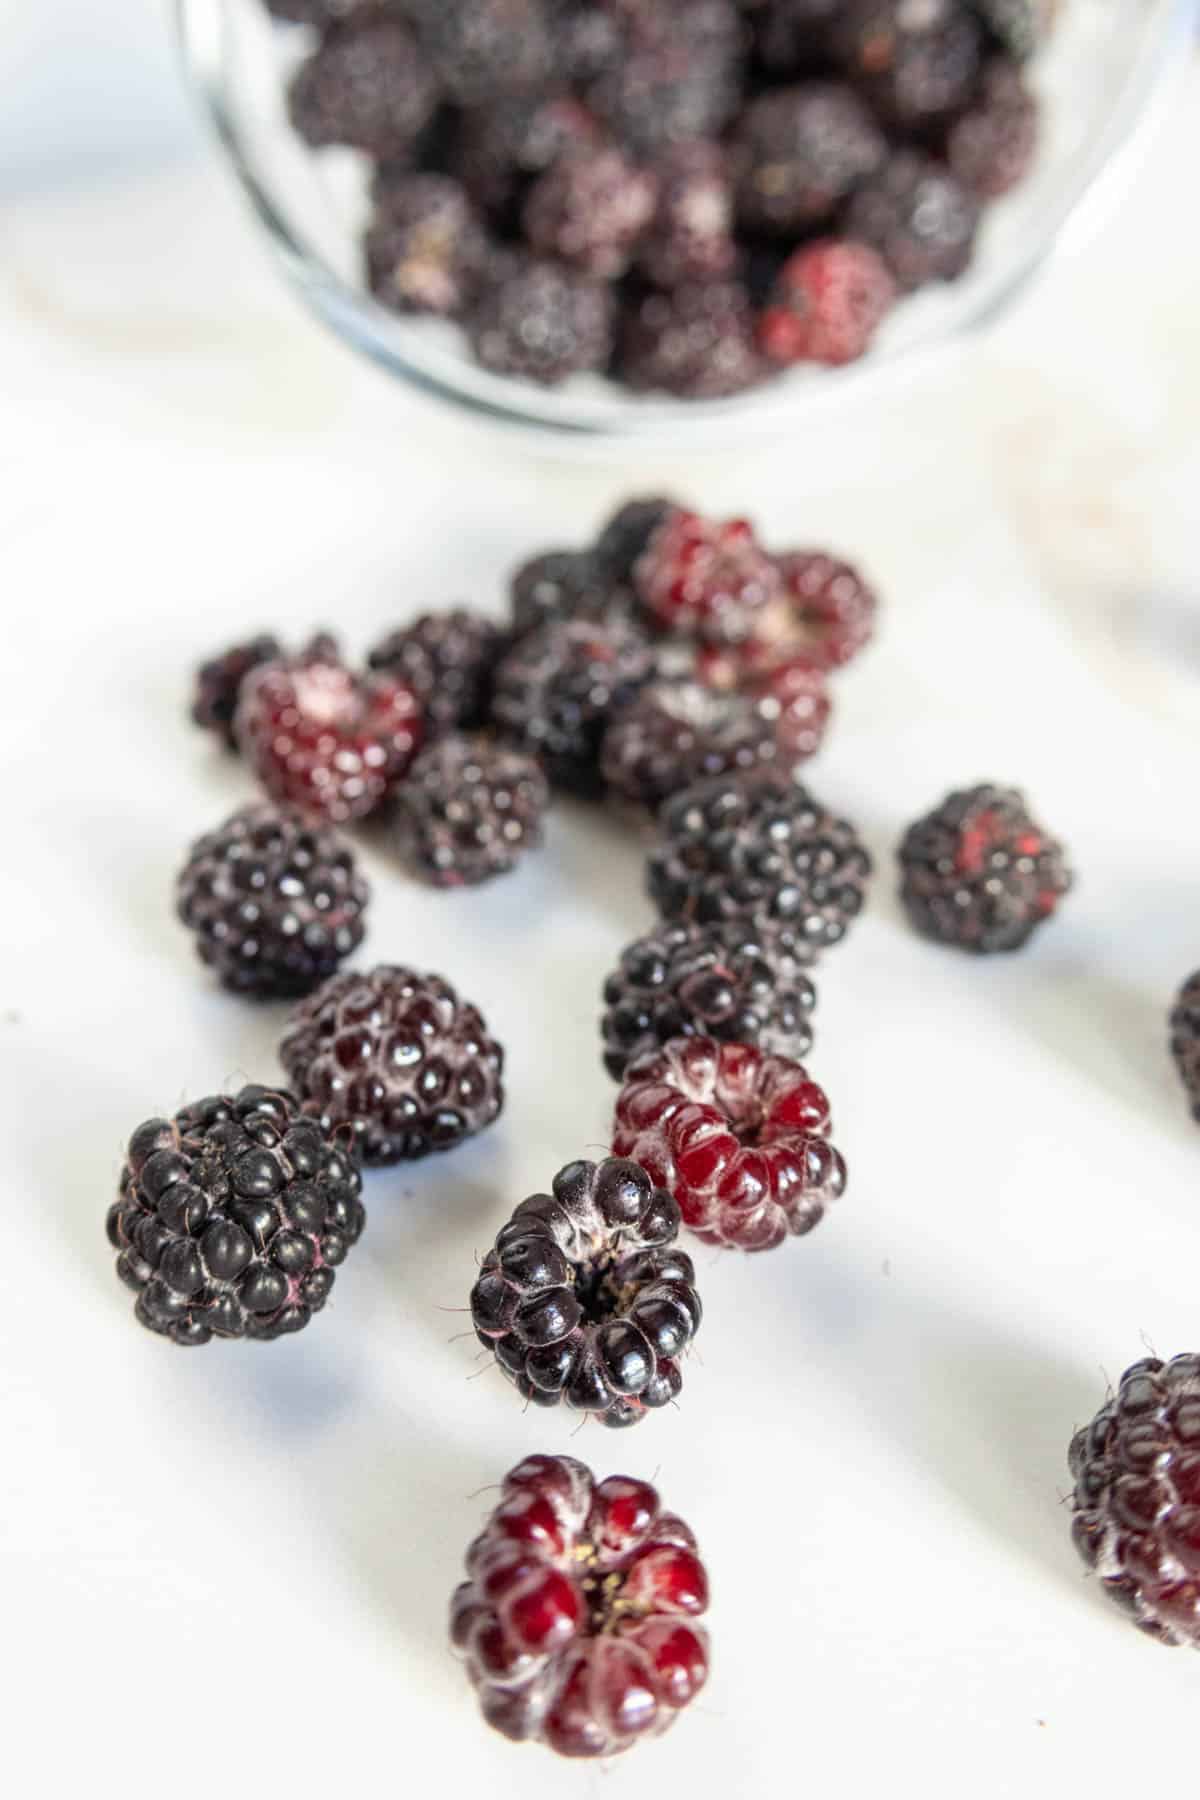 Fresh blackberries scattered on a white surface with more in a glass bowl in the background.